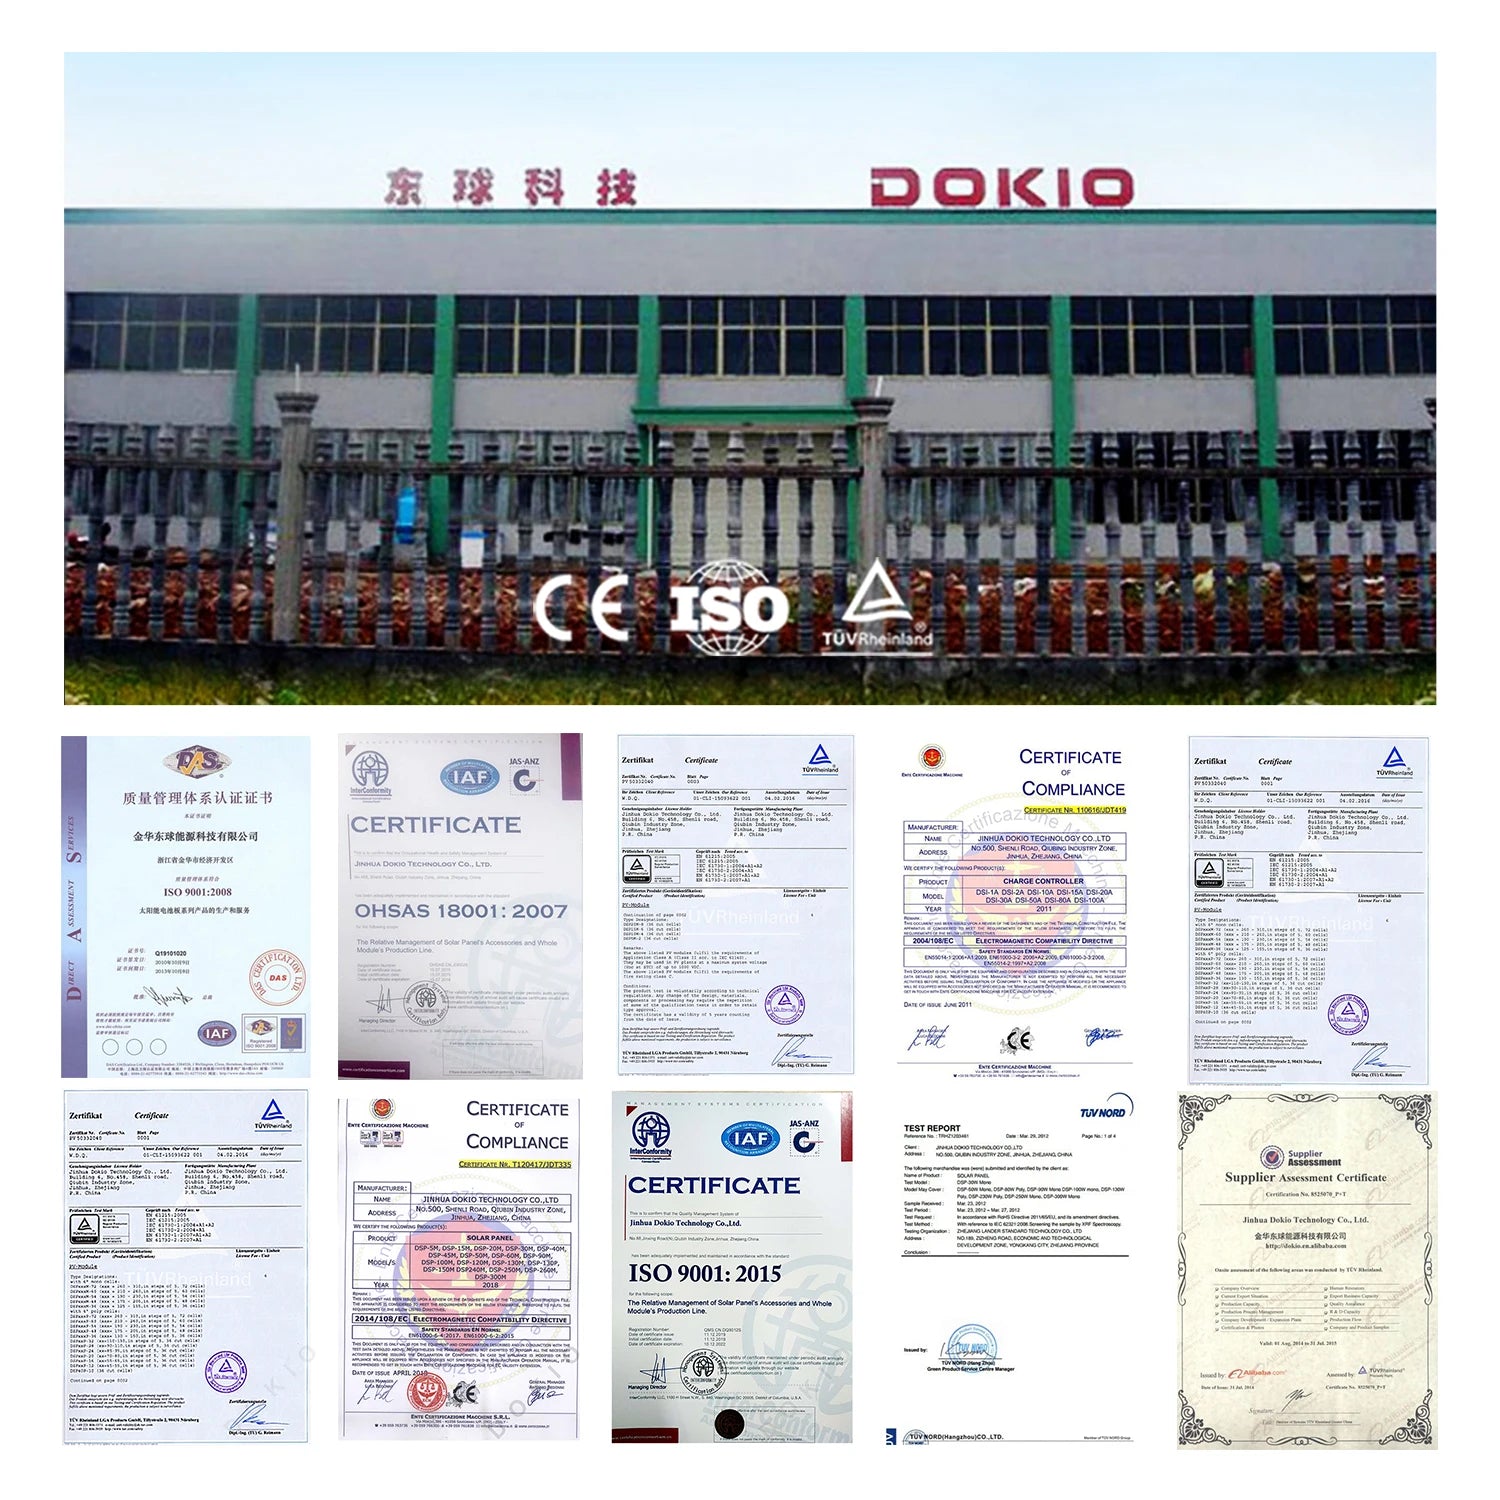 DOKIO 18V 100W 300W Portable Ffolding Solar Panel, Certified by DOKIO, our portable solar panels meet international quality and safety standards for reliability, durability, and sustainability.